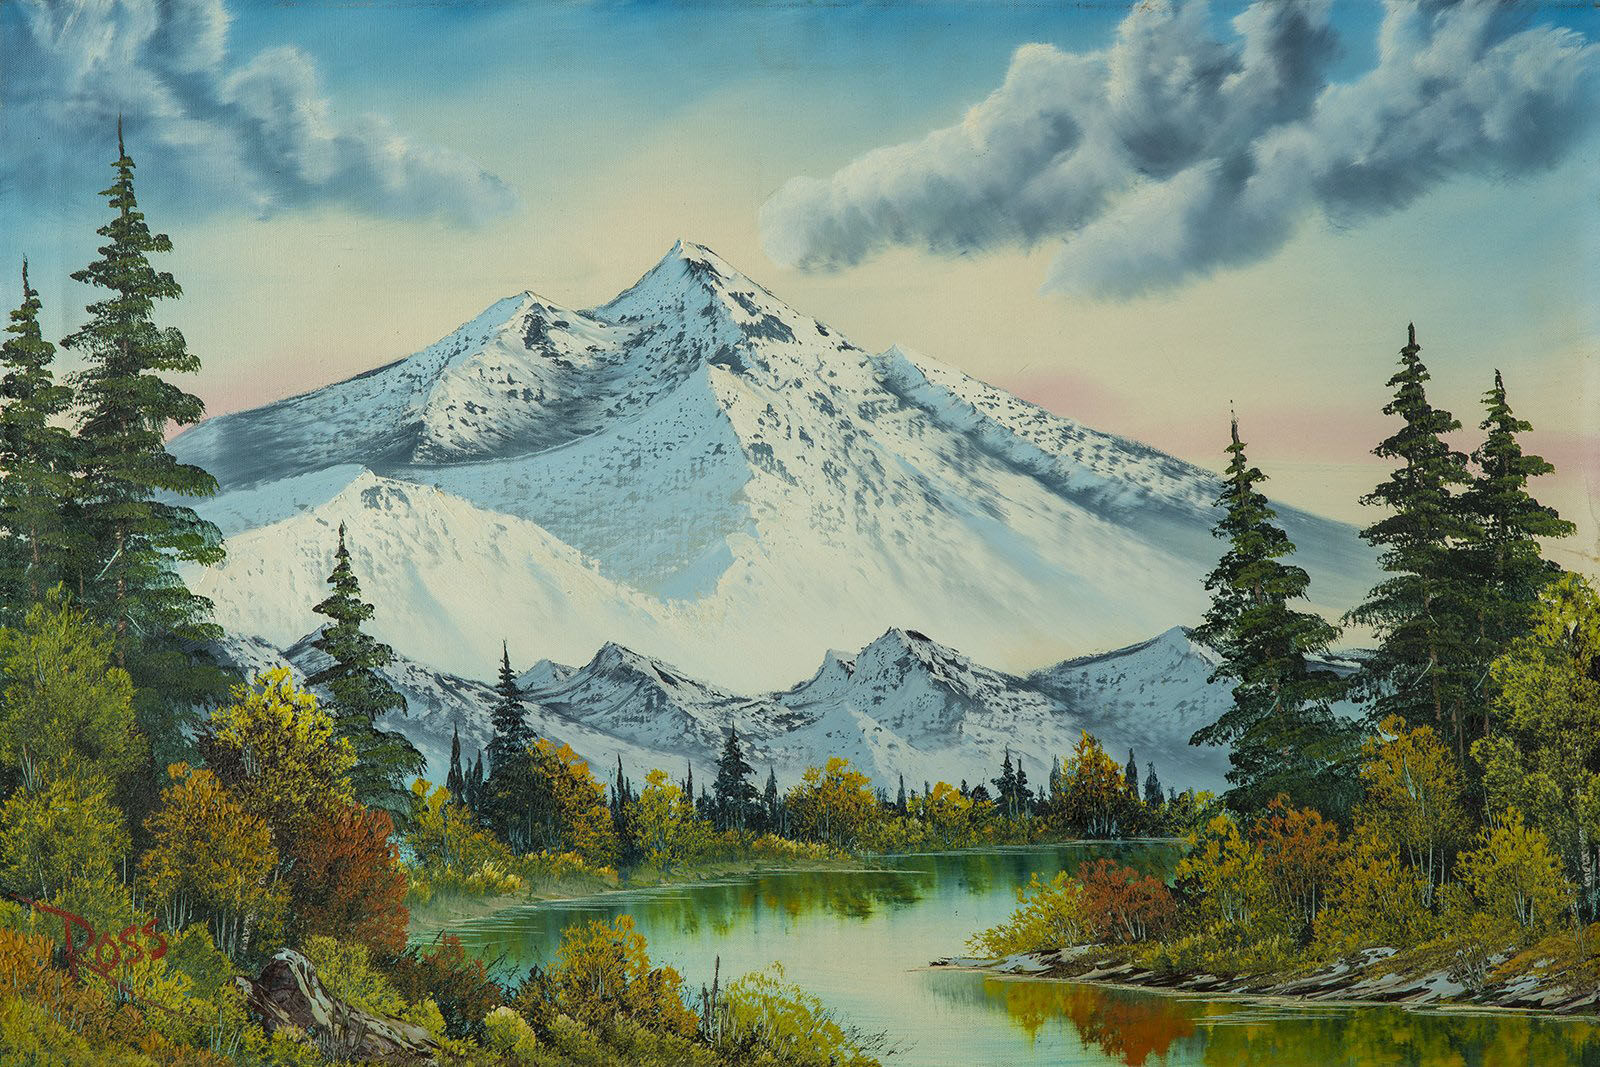 Bob Ross: Iconic Landscape Artist and An Enduring Inspiration